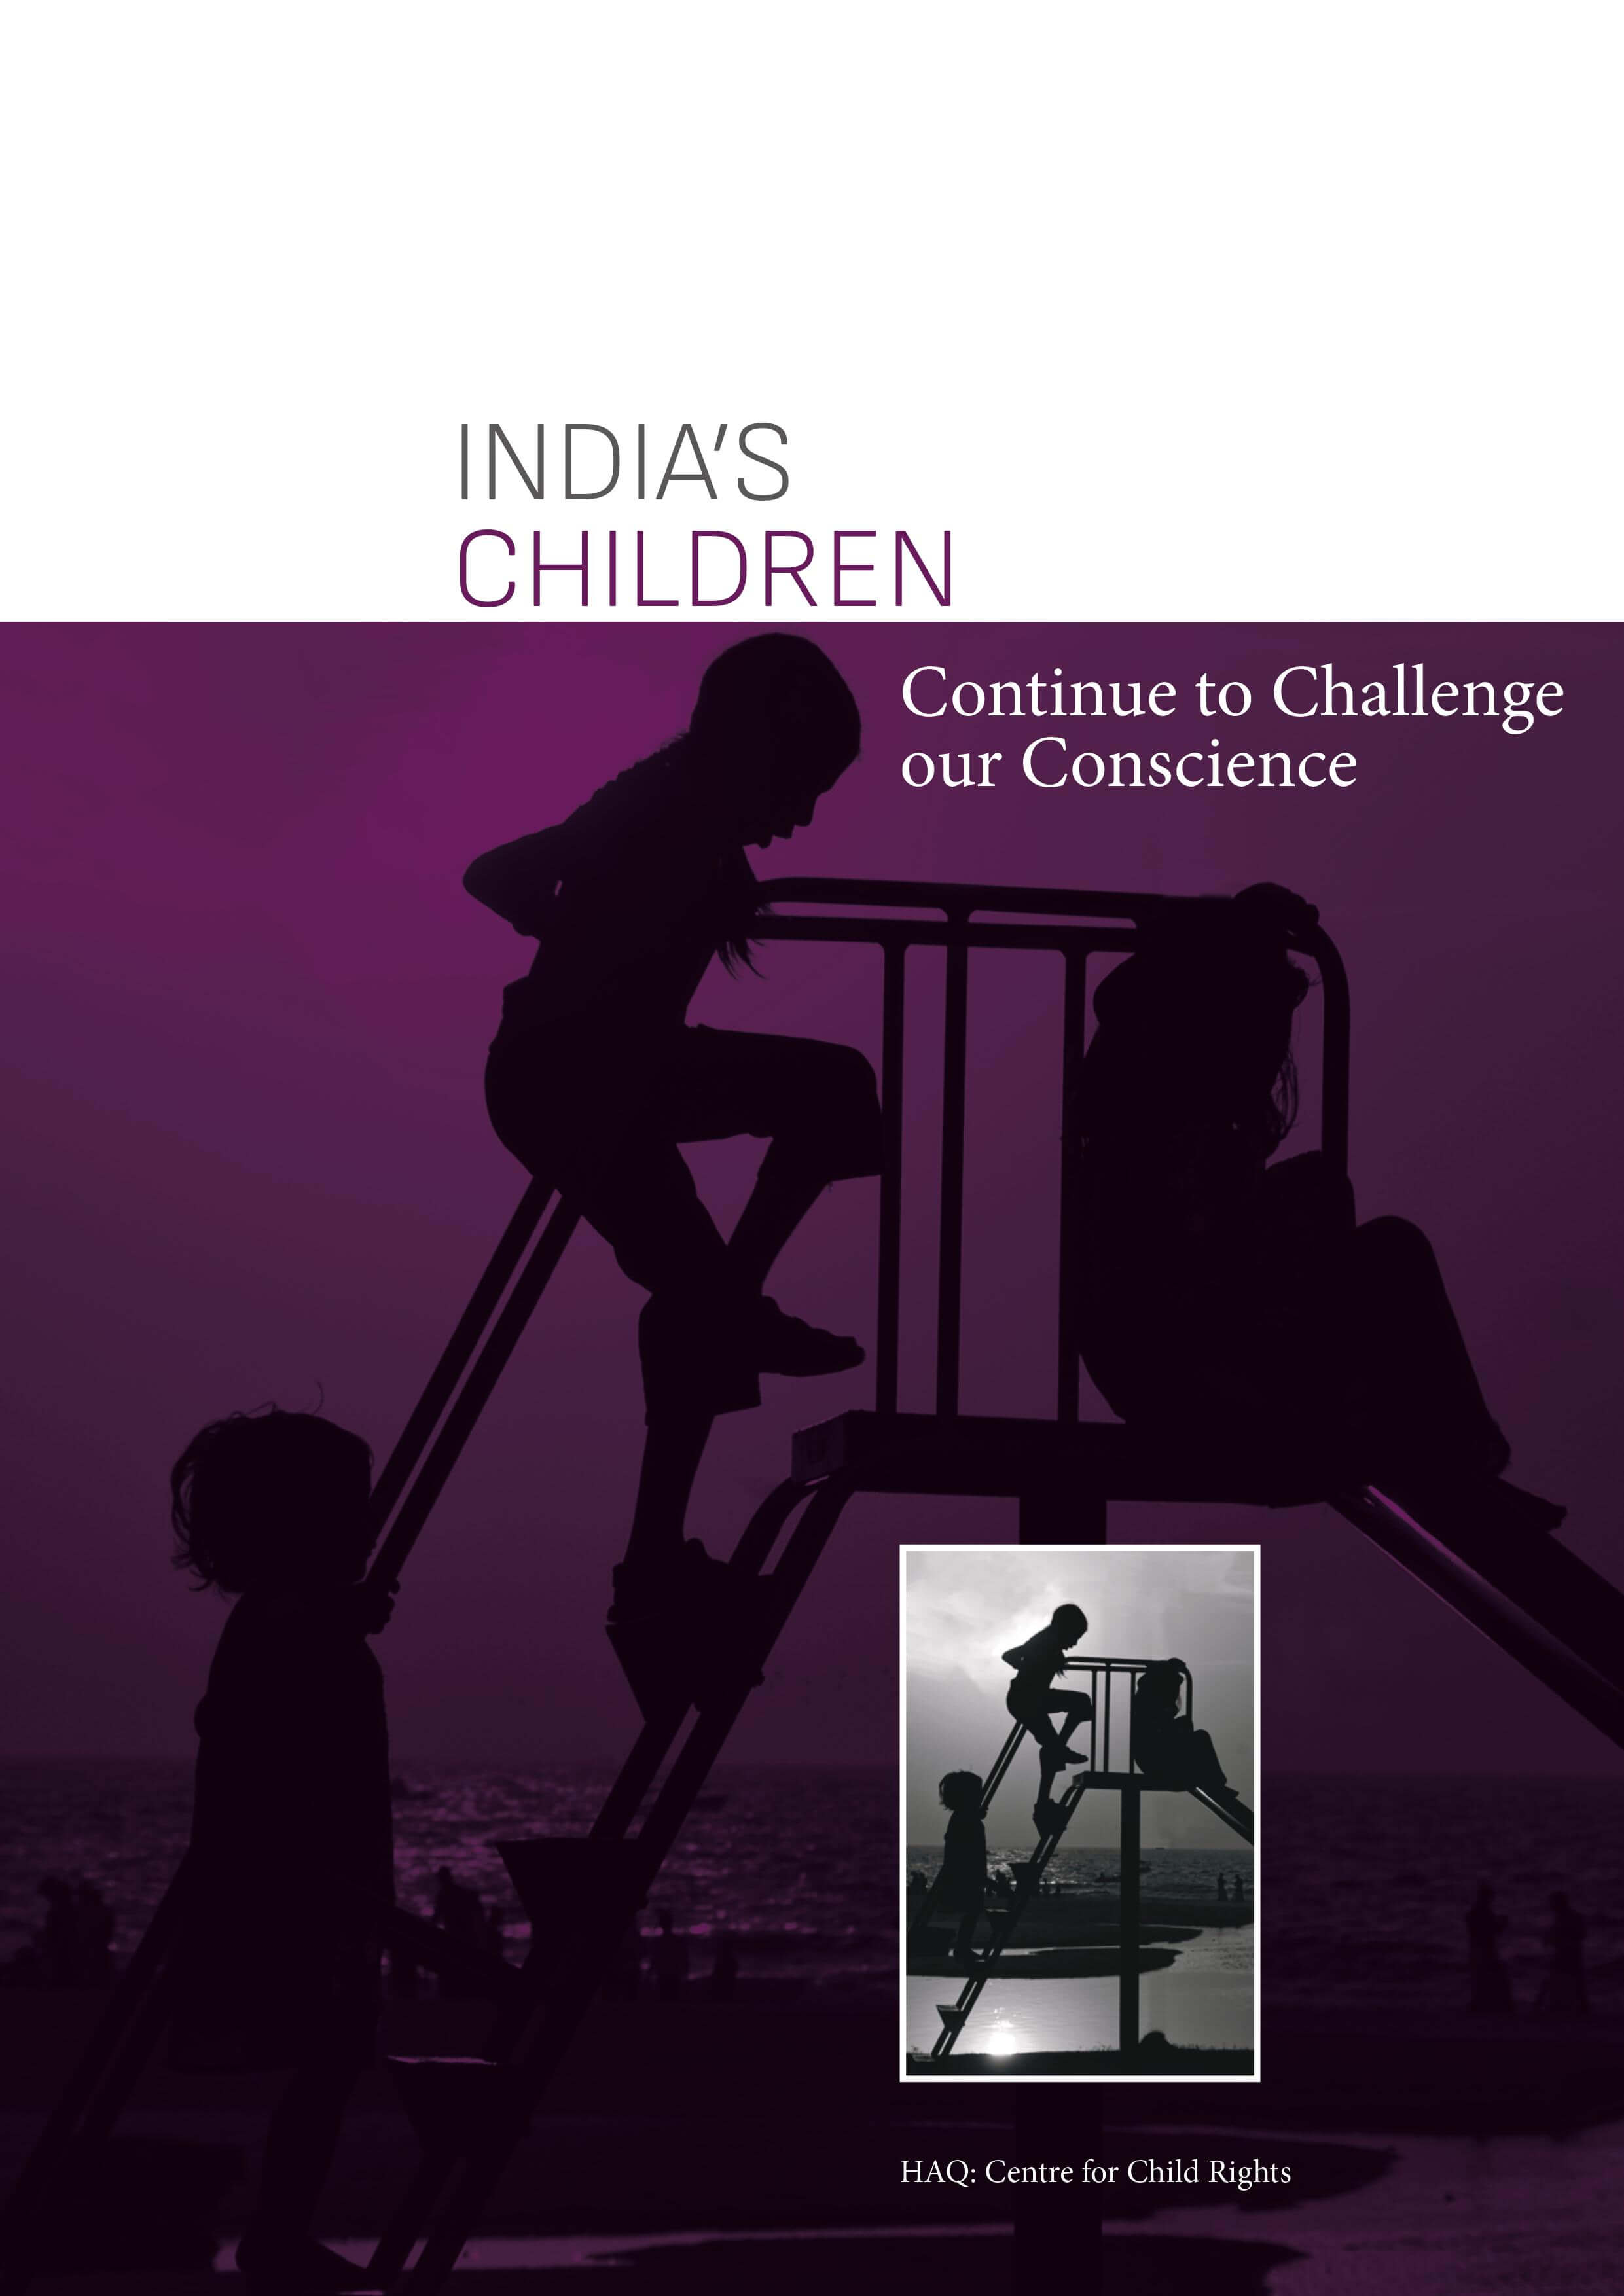 INDIA’S CHILDREN Continue to Challenge our Conscience